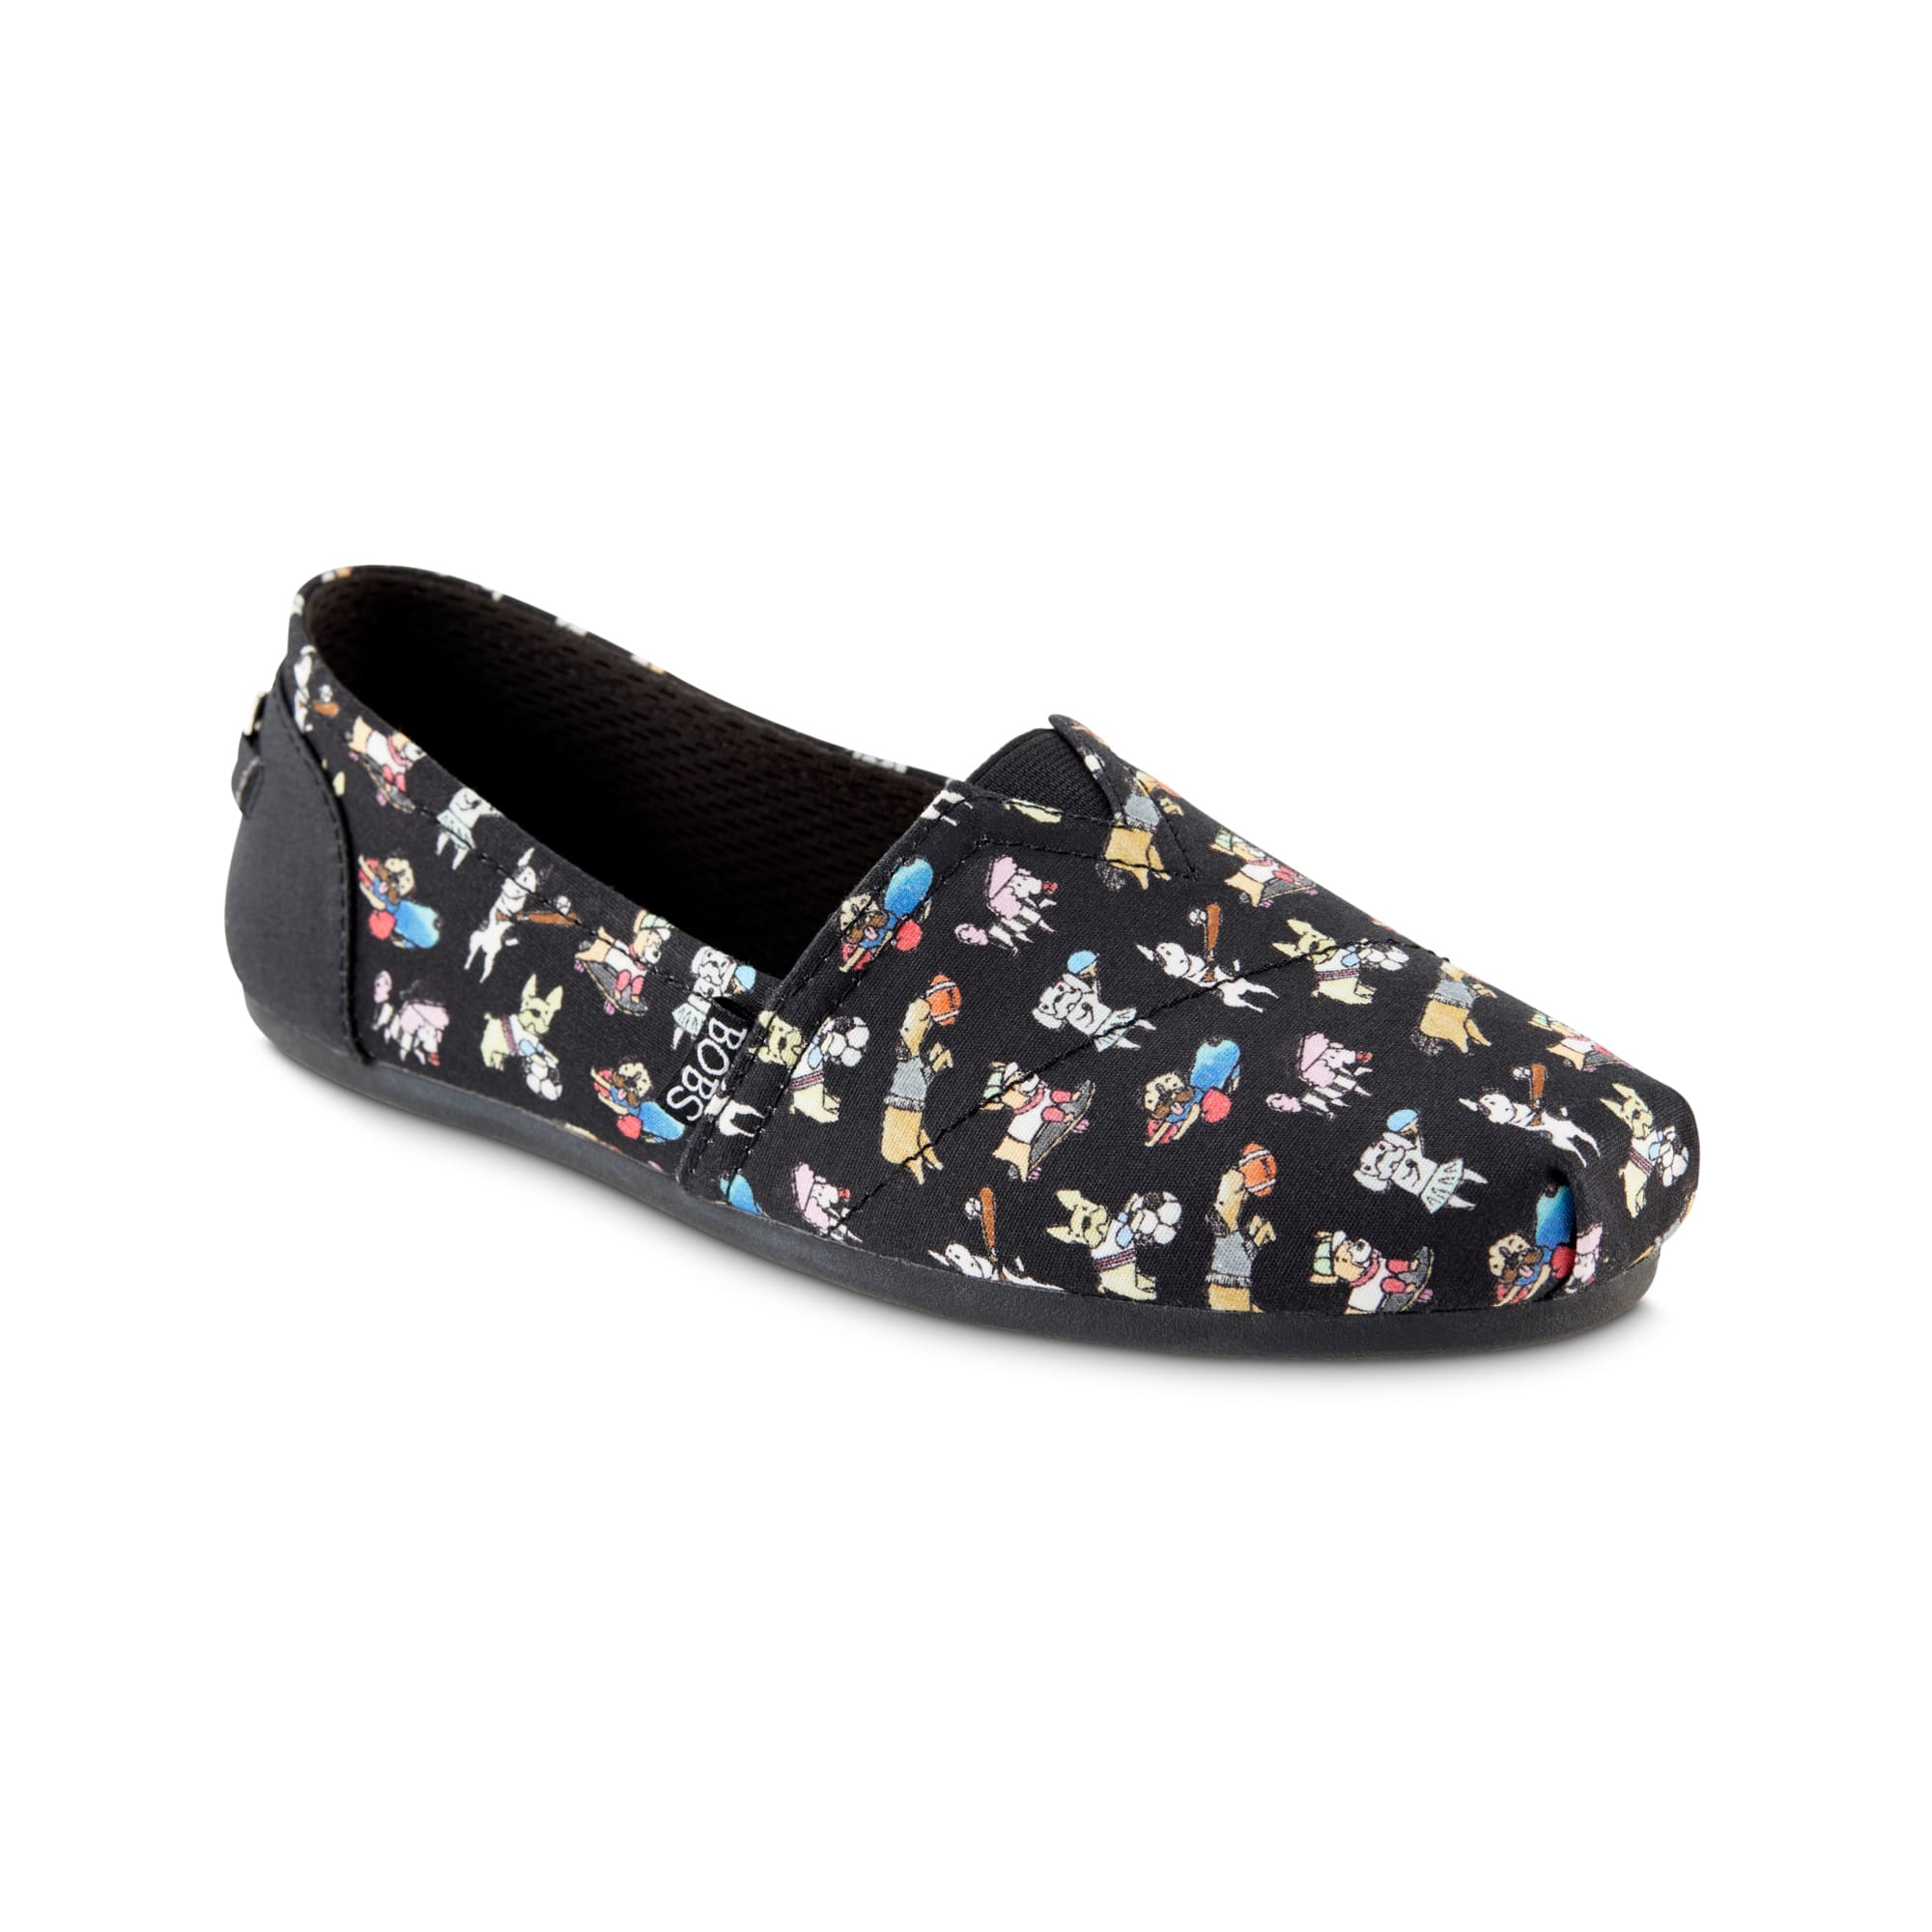 skechers bobs for dogs shoes off 62 